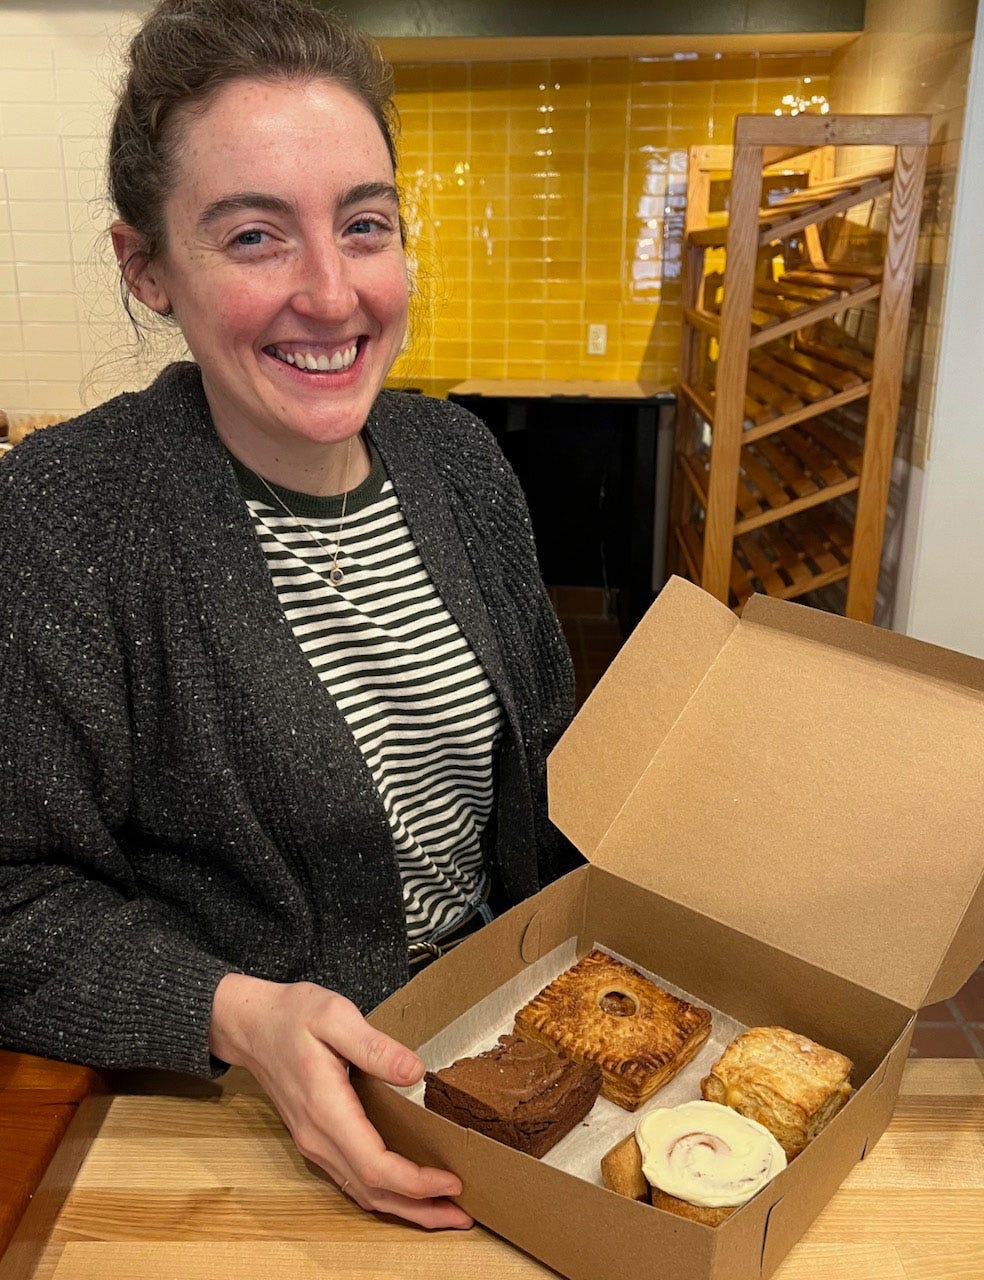 A person smiling next to a box of donuts

Description automatically generated with medium confidence